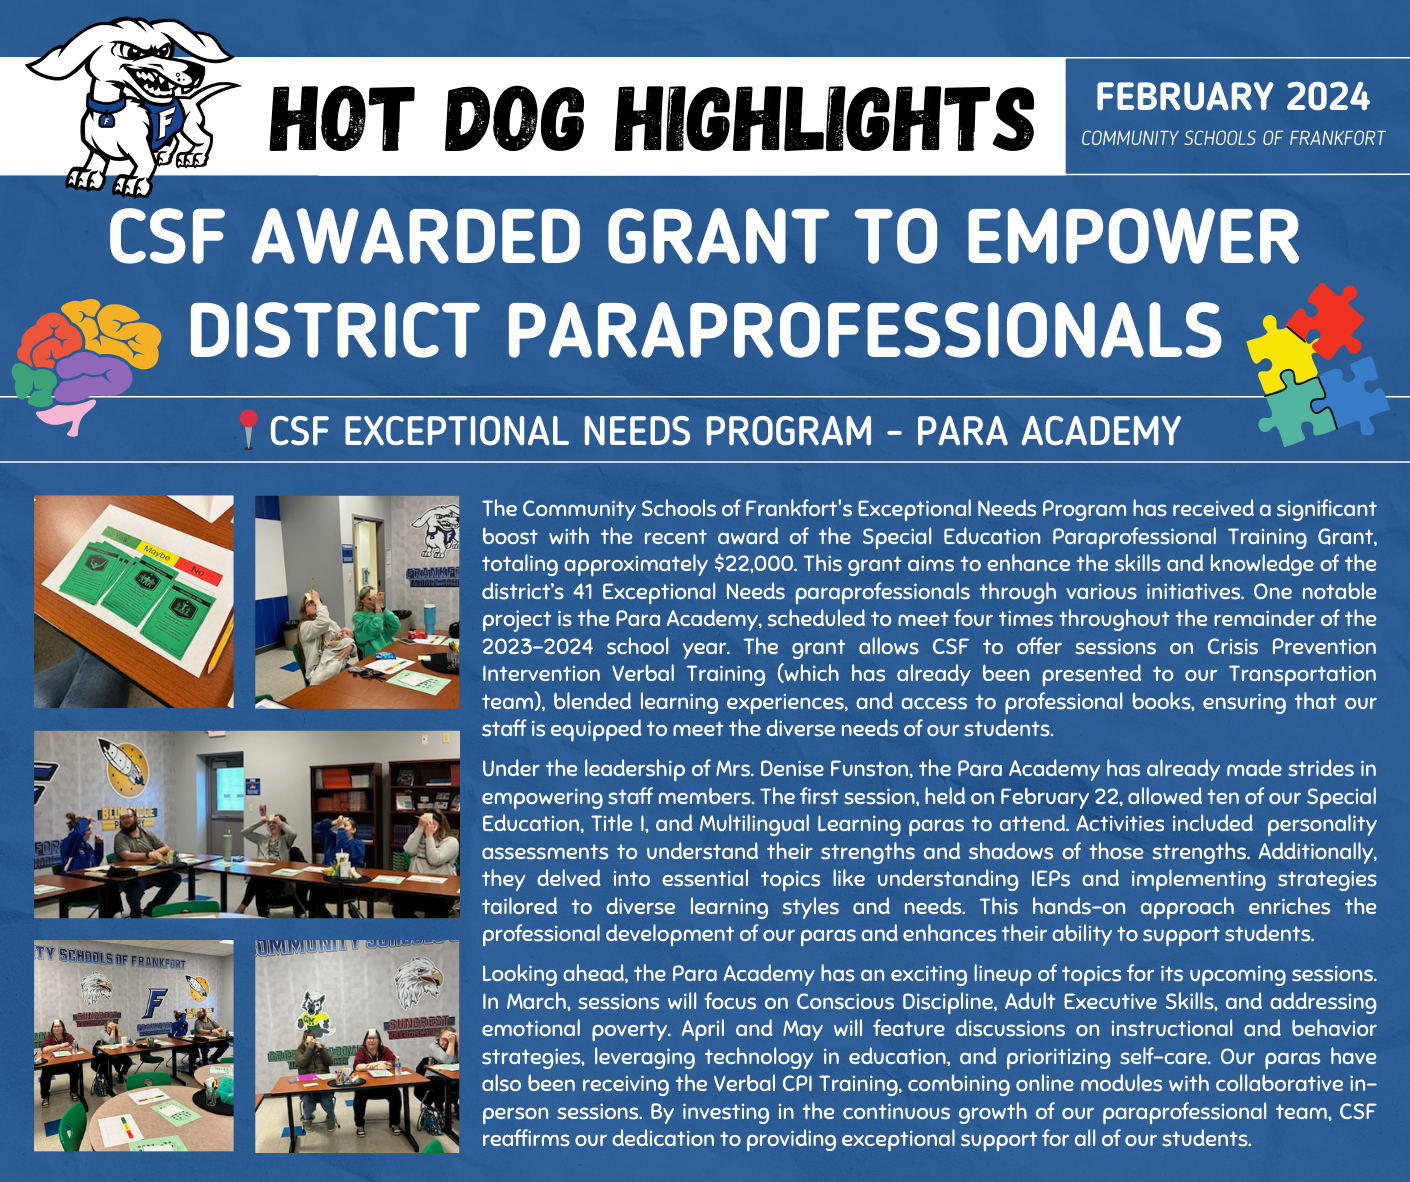 The Community Schools of Frankfort's Exceptional Needs Program has received a significant boost with the recent award of the Special Education Paraprofessional Training Grant, totaling approximately $22,000. This grant aims to enhance the skills and knowledge of the district’s 41 Exceptional Needs paraprofessionals through various initiatives. One notable project is the Para Academy, scheduled to meet four times throughout the remainder of the 2023-2024 school year. The grant allows CSF to offer sessions on Crisis Prevention Intervention Verbal Training (which has already been presented to our Transportation team), blended learning experiences, and access to professional books, ensuring that our staff is equipped to meet the diverse needs of our students.  Under the leadership of Mrs. Denise Funston, the Para Academy has already made strides in empowering staff members. The first session, held on February 22, allowed ten of our Special Education, Title I, and Multilingual Learning paras to attend. Activities included  personality assessments to understand their strengths and shadows of those strengths. Additionally, they delved into essential topics like understanding IEPs and implementing strategies tailored to diverse learning styles and needs. This hands-on approach enriches the professional development of our paras and enhances their ability to support students.  Looking ahead, the Para Academy has an exciting lineup of topics for its upcoming sessions. In March, sessions will focus on Conscious Discipline, Adult Executive Skills, and addressing emotional poverty. April and May will feature discussions on instructional and behavior strategies, leveraging technology in education, and prioritizing self-care. Our paras have also been receiving the Verbal CPI Training, combining online modules with collaborative in-person sessions. By investing in the continuous growth of our paraprofessional team, CSF reaffirms our dedication to providing exceptional support for all of our students.